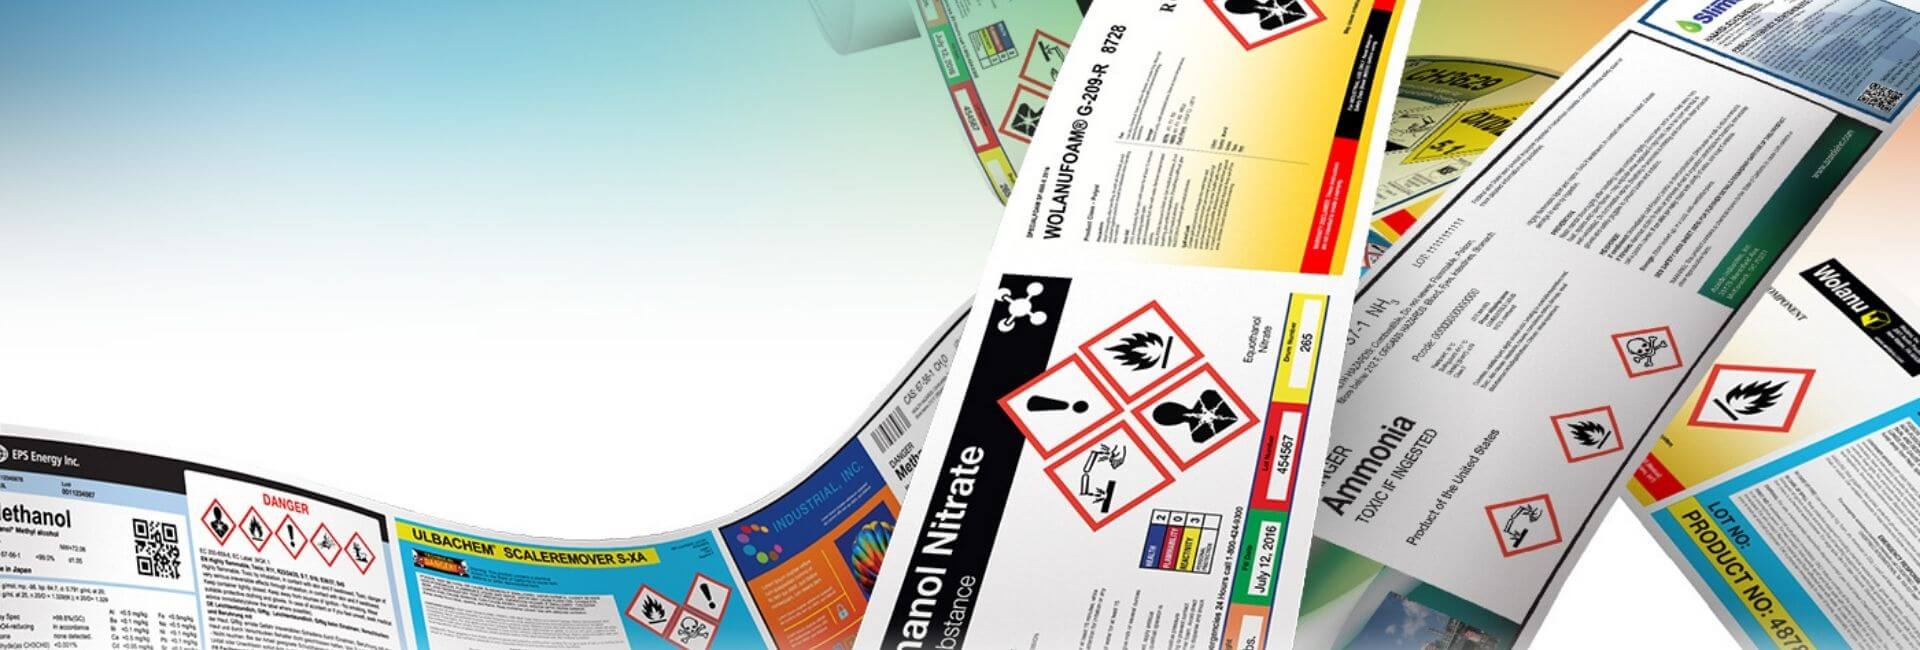 Chemical resistant labels